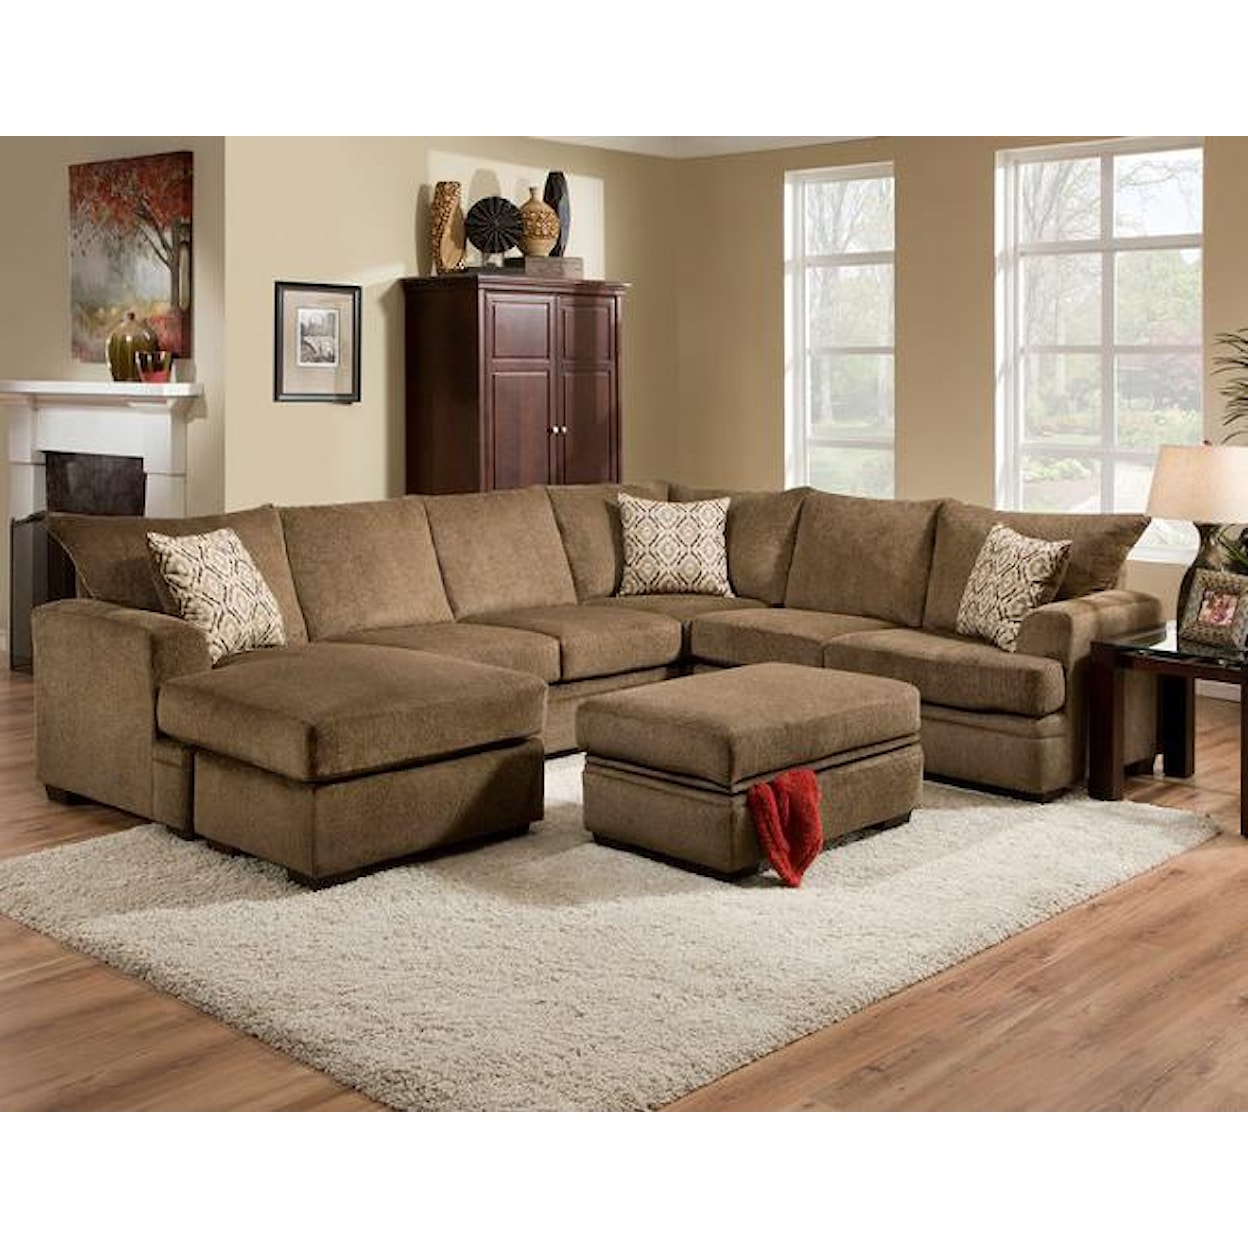 Peak Living 6800 Sectional Sofa with Left Side Chaise